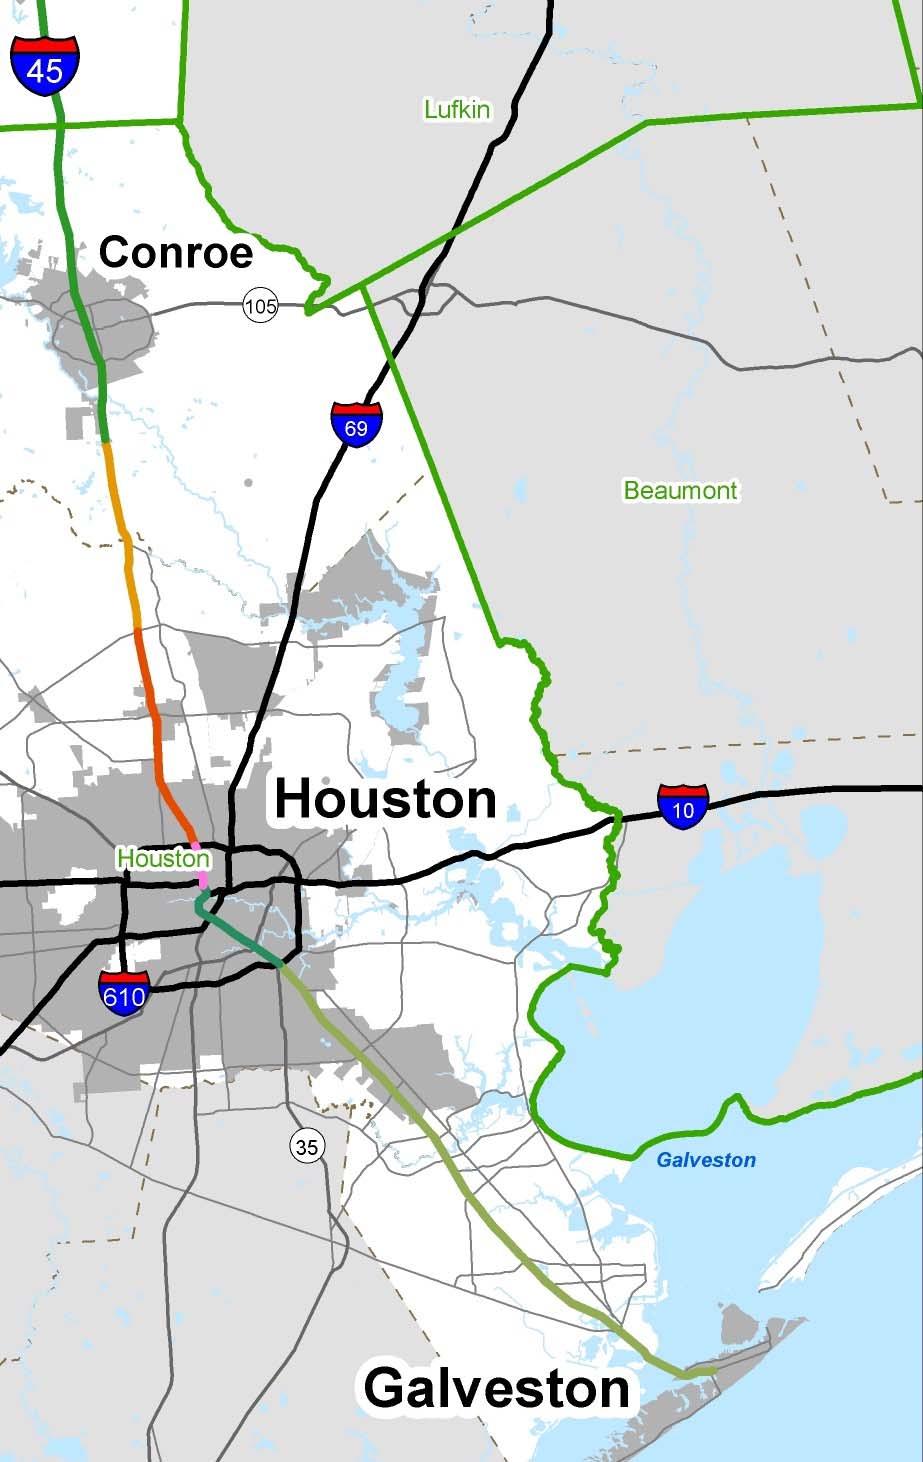 Houston District Freight Recommendations, 2 of 2 Segment 3 (I 610N I 10): Programmed projects: High mast illumination; transportation system management; and reconstruct frontage roads Planned